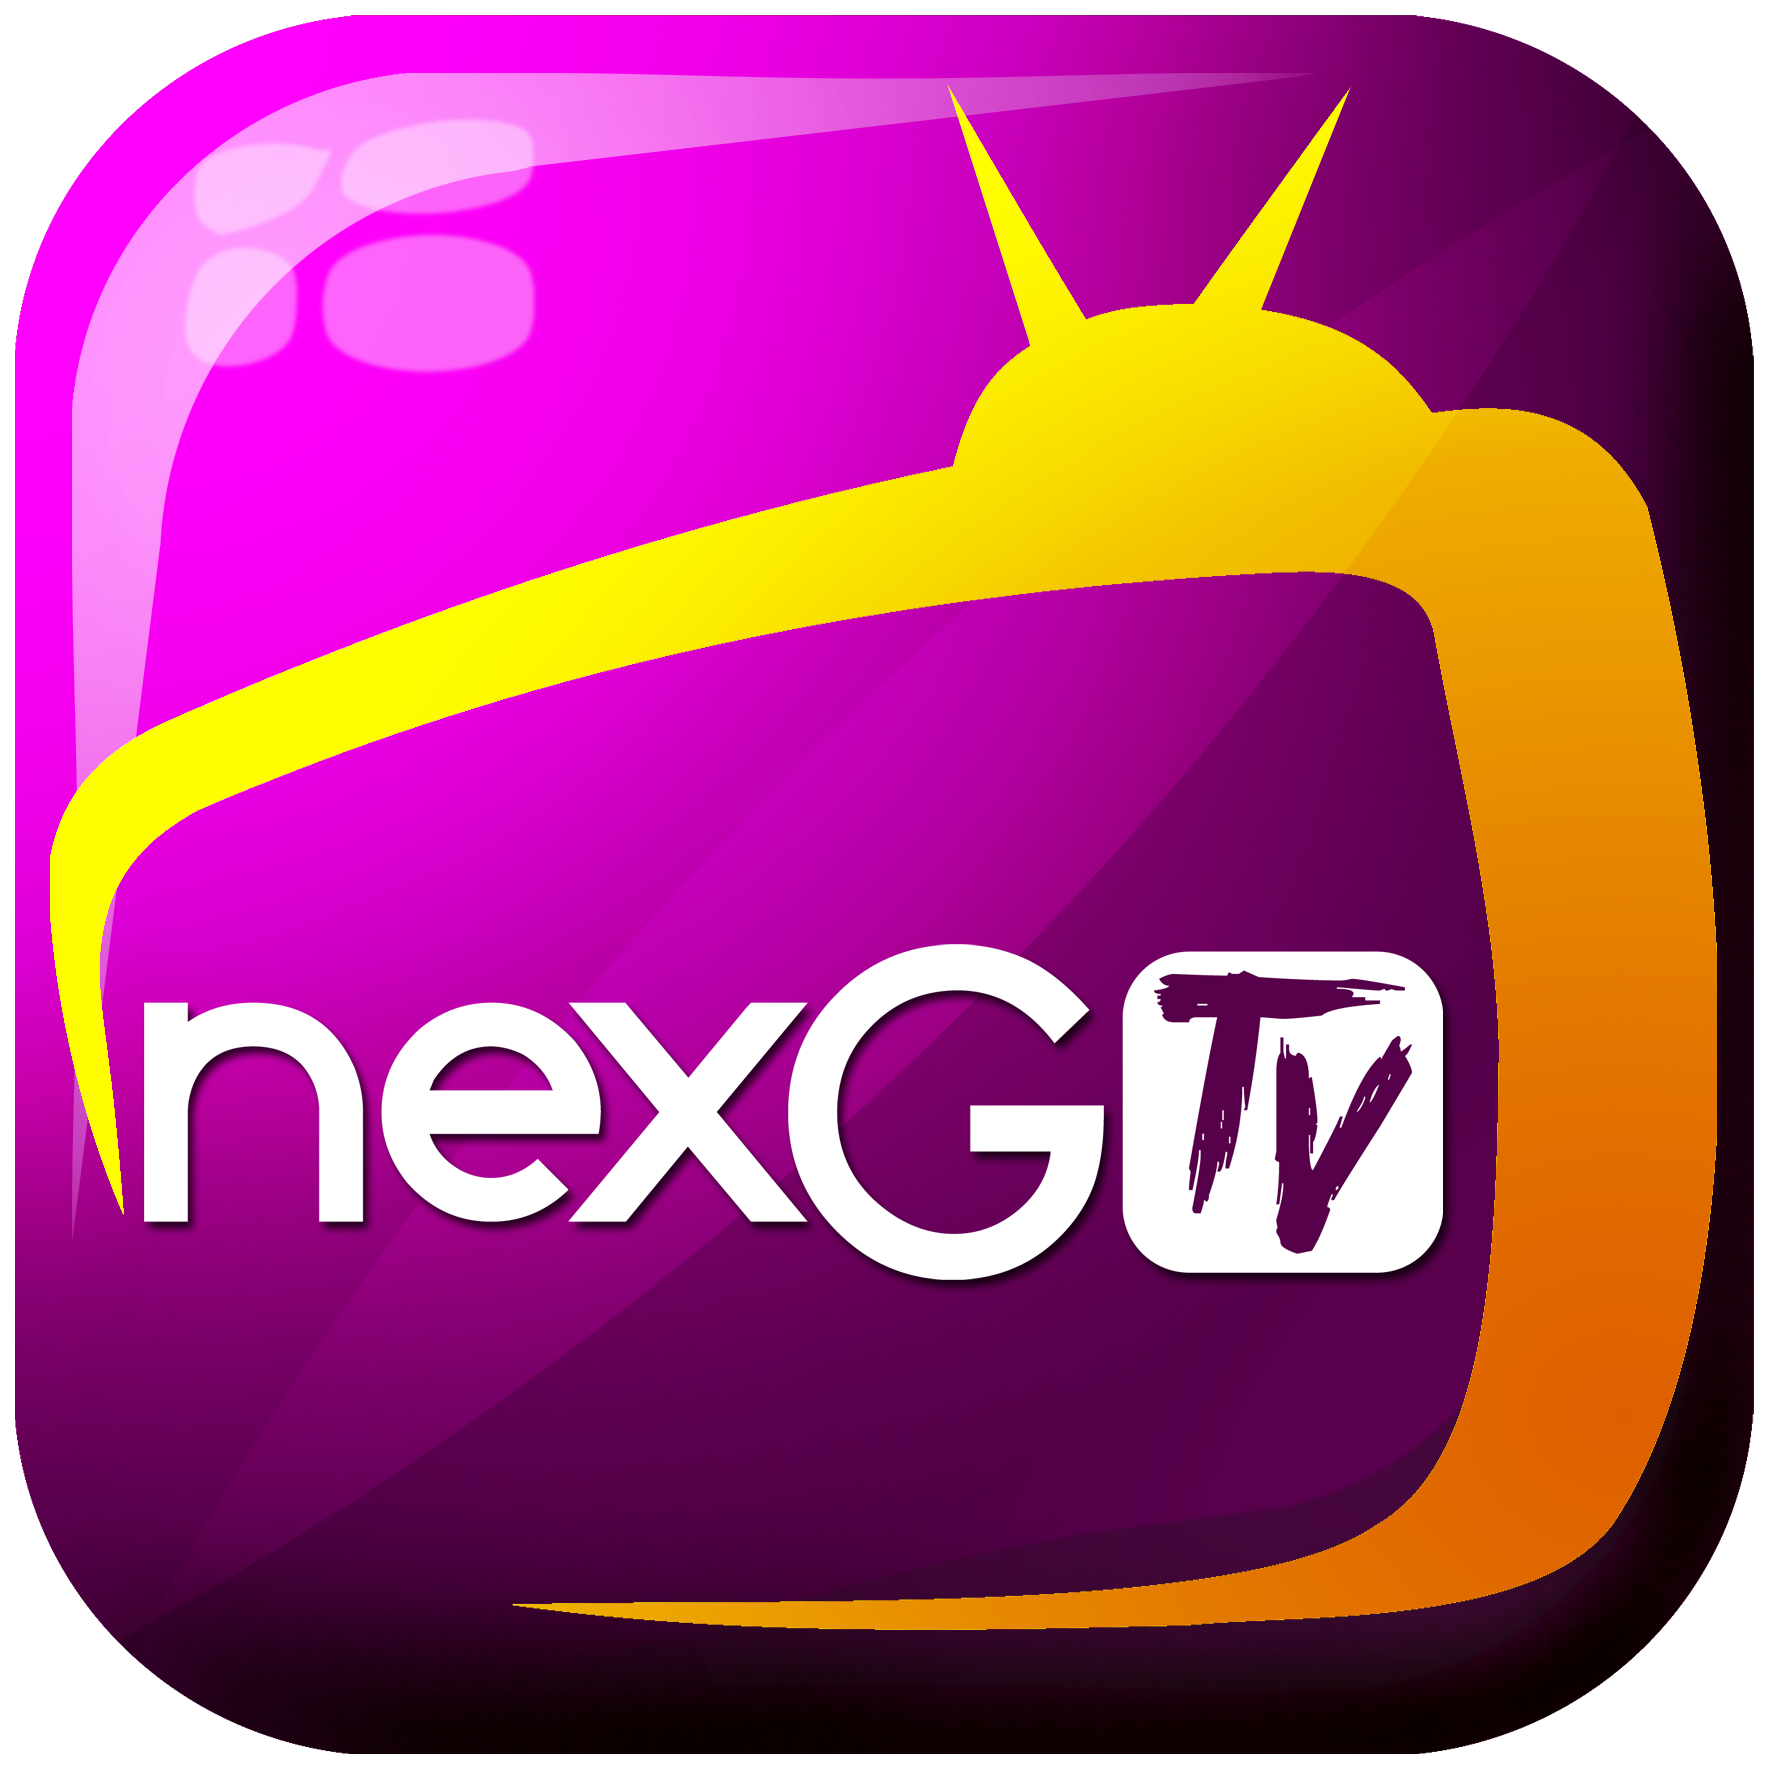 Read more about the article nexGTv strengthens its international presence by integrating operator billing in UAE, Sri Lanka,  and  Qatar market.